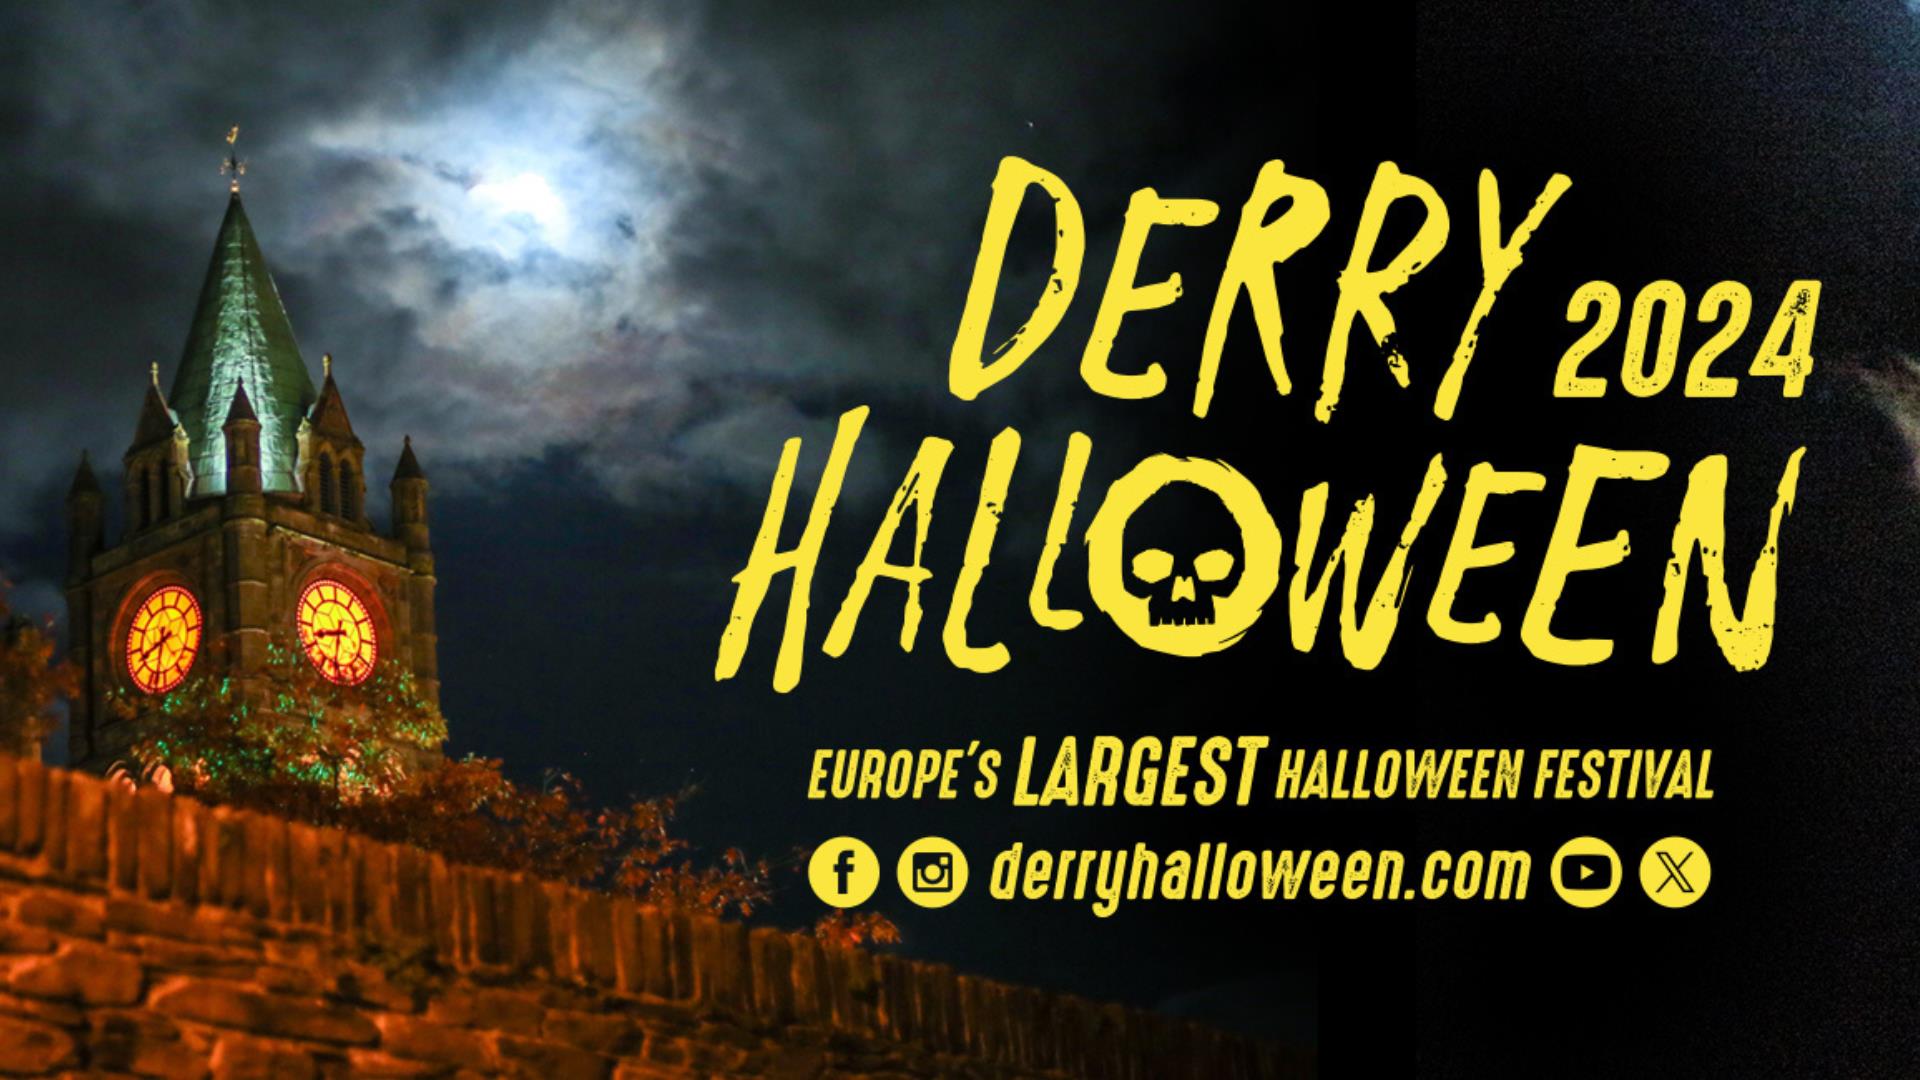 Banner image for Derry Halloween, showing the Guildhall on a stormy background.